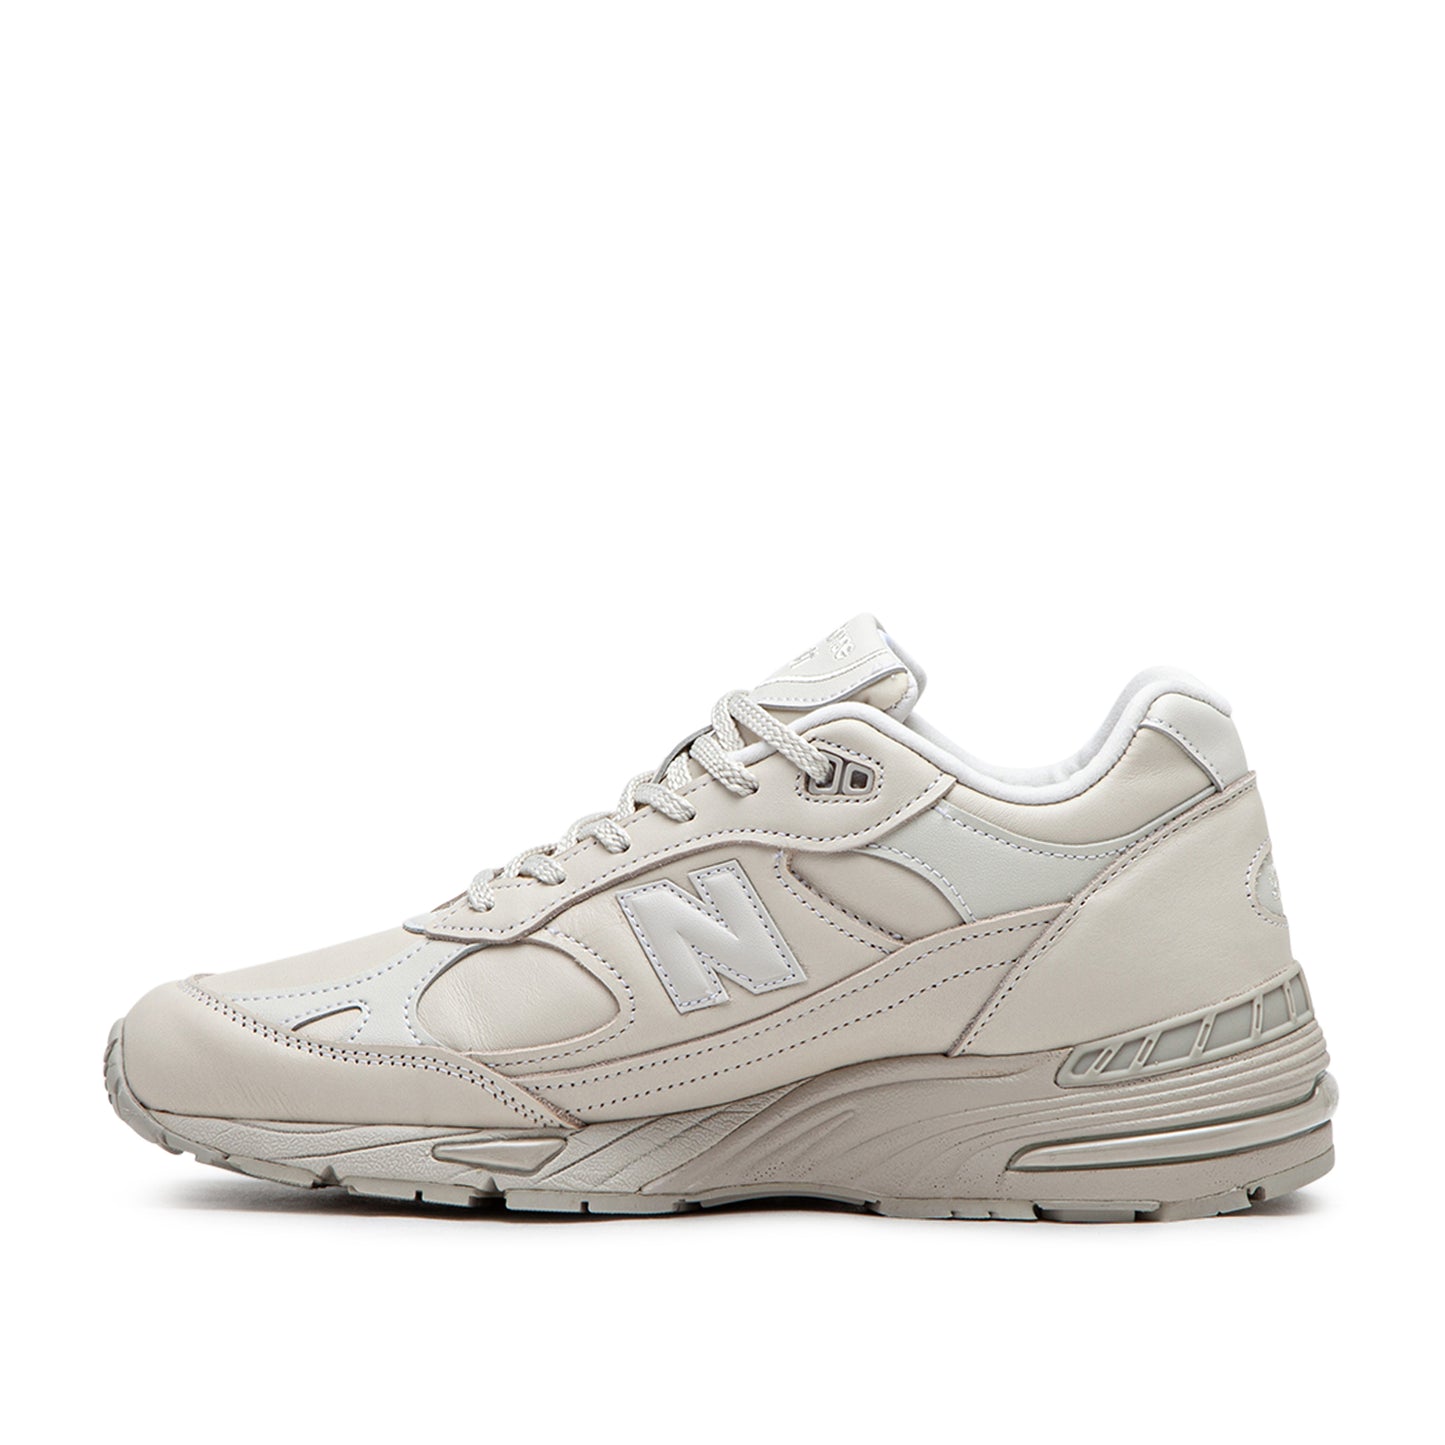 New Balance M991OW Made in UK Contemporary Luxe (Creme)  - Cheap Cerbe Jordan Outlet